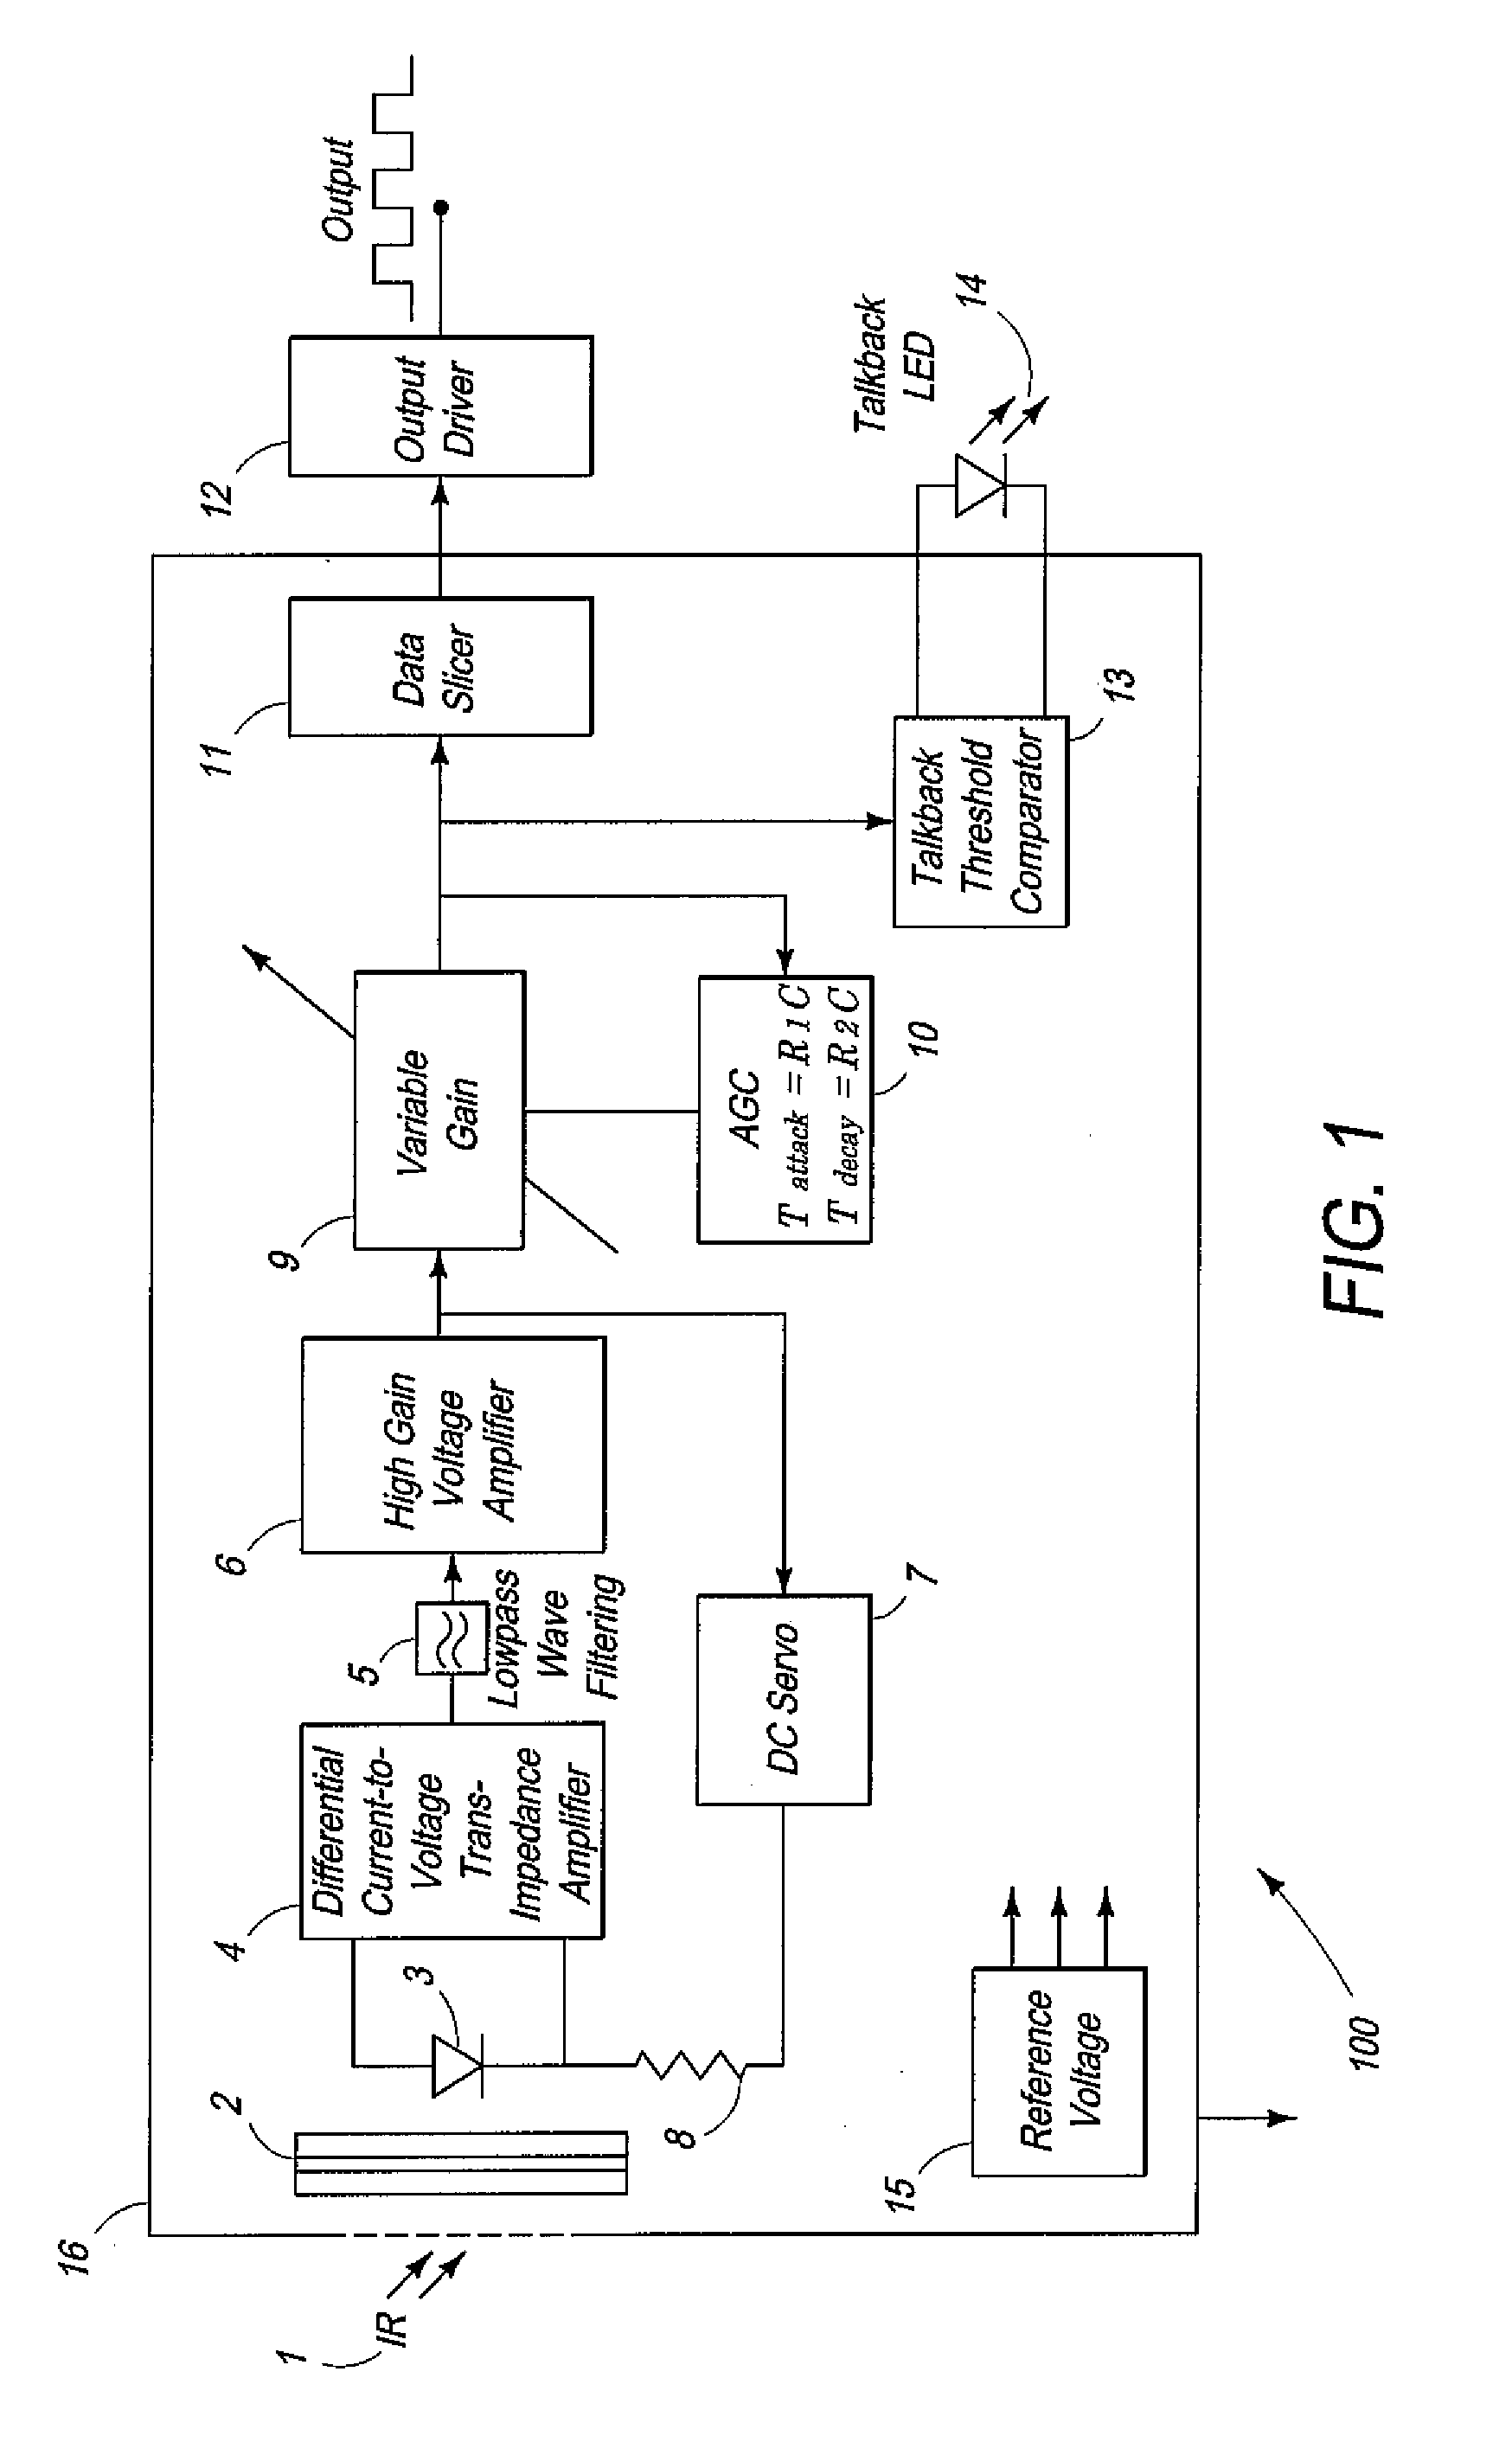 Infrared Repeater System